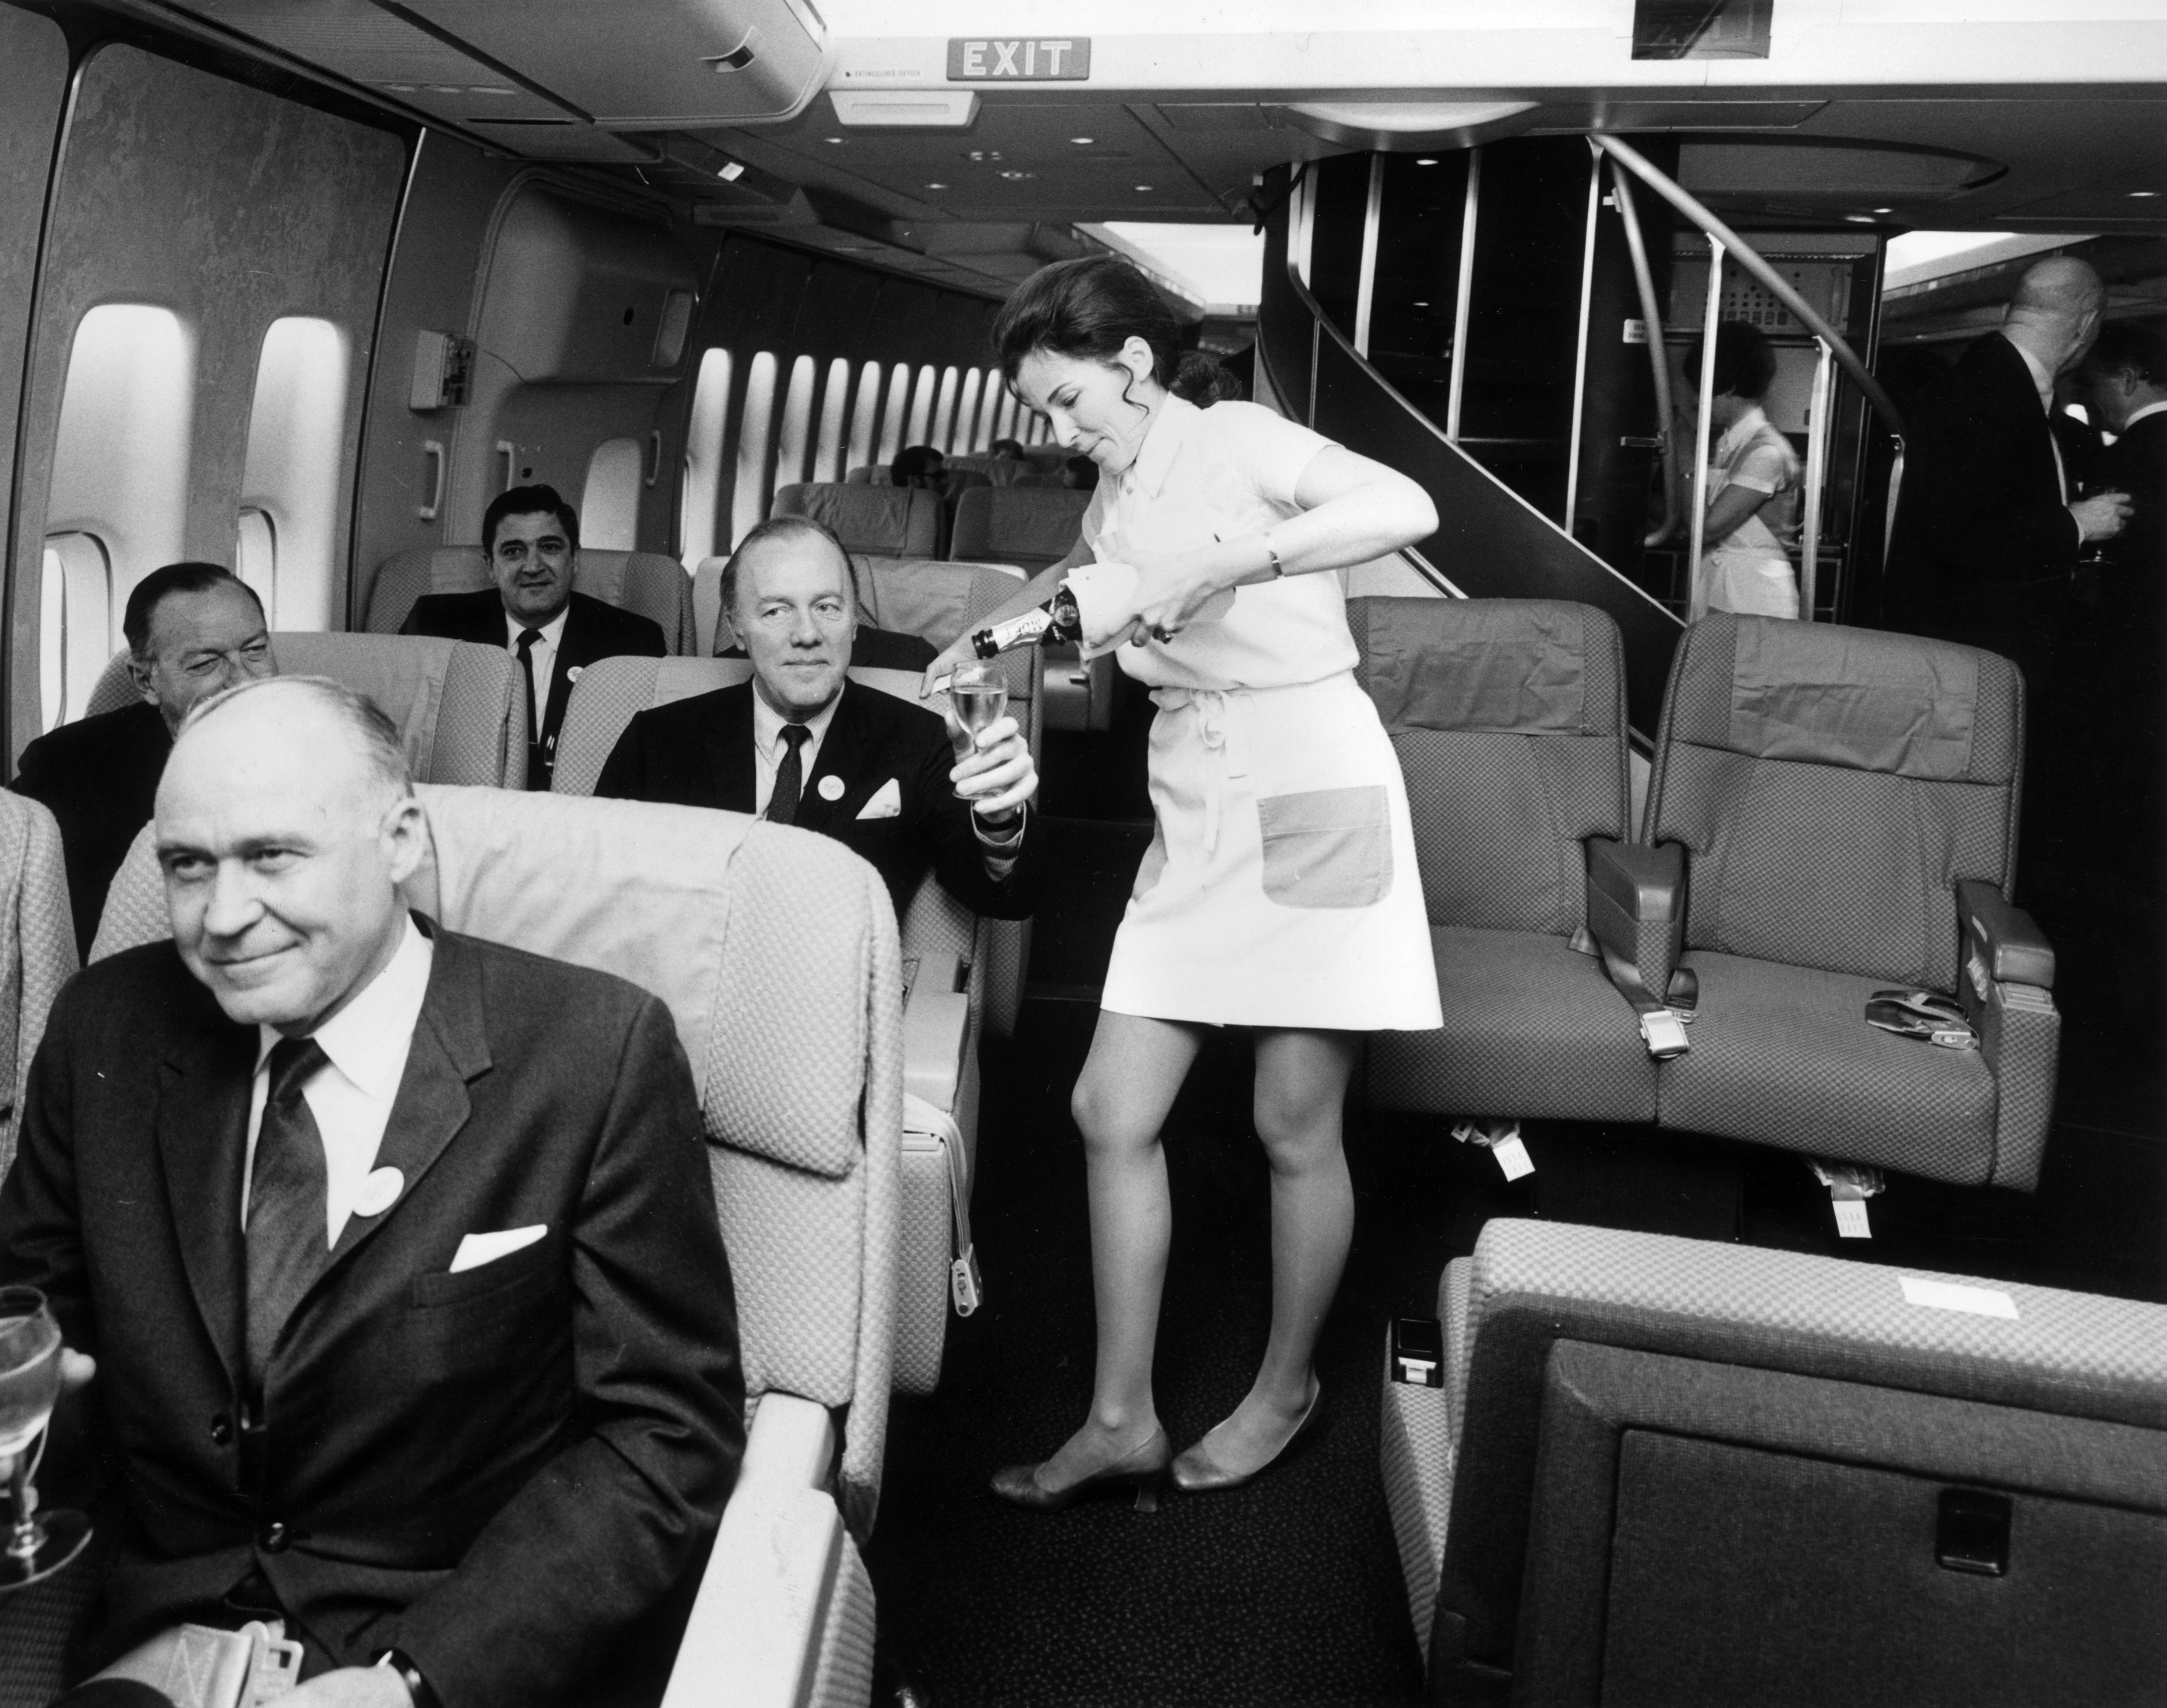 A Pan American (Pan Am) airhostess serving champagne in the first class cabin of a Boeing 747 jumbo jet. Image: Tim Graham / Getty Images